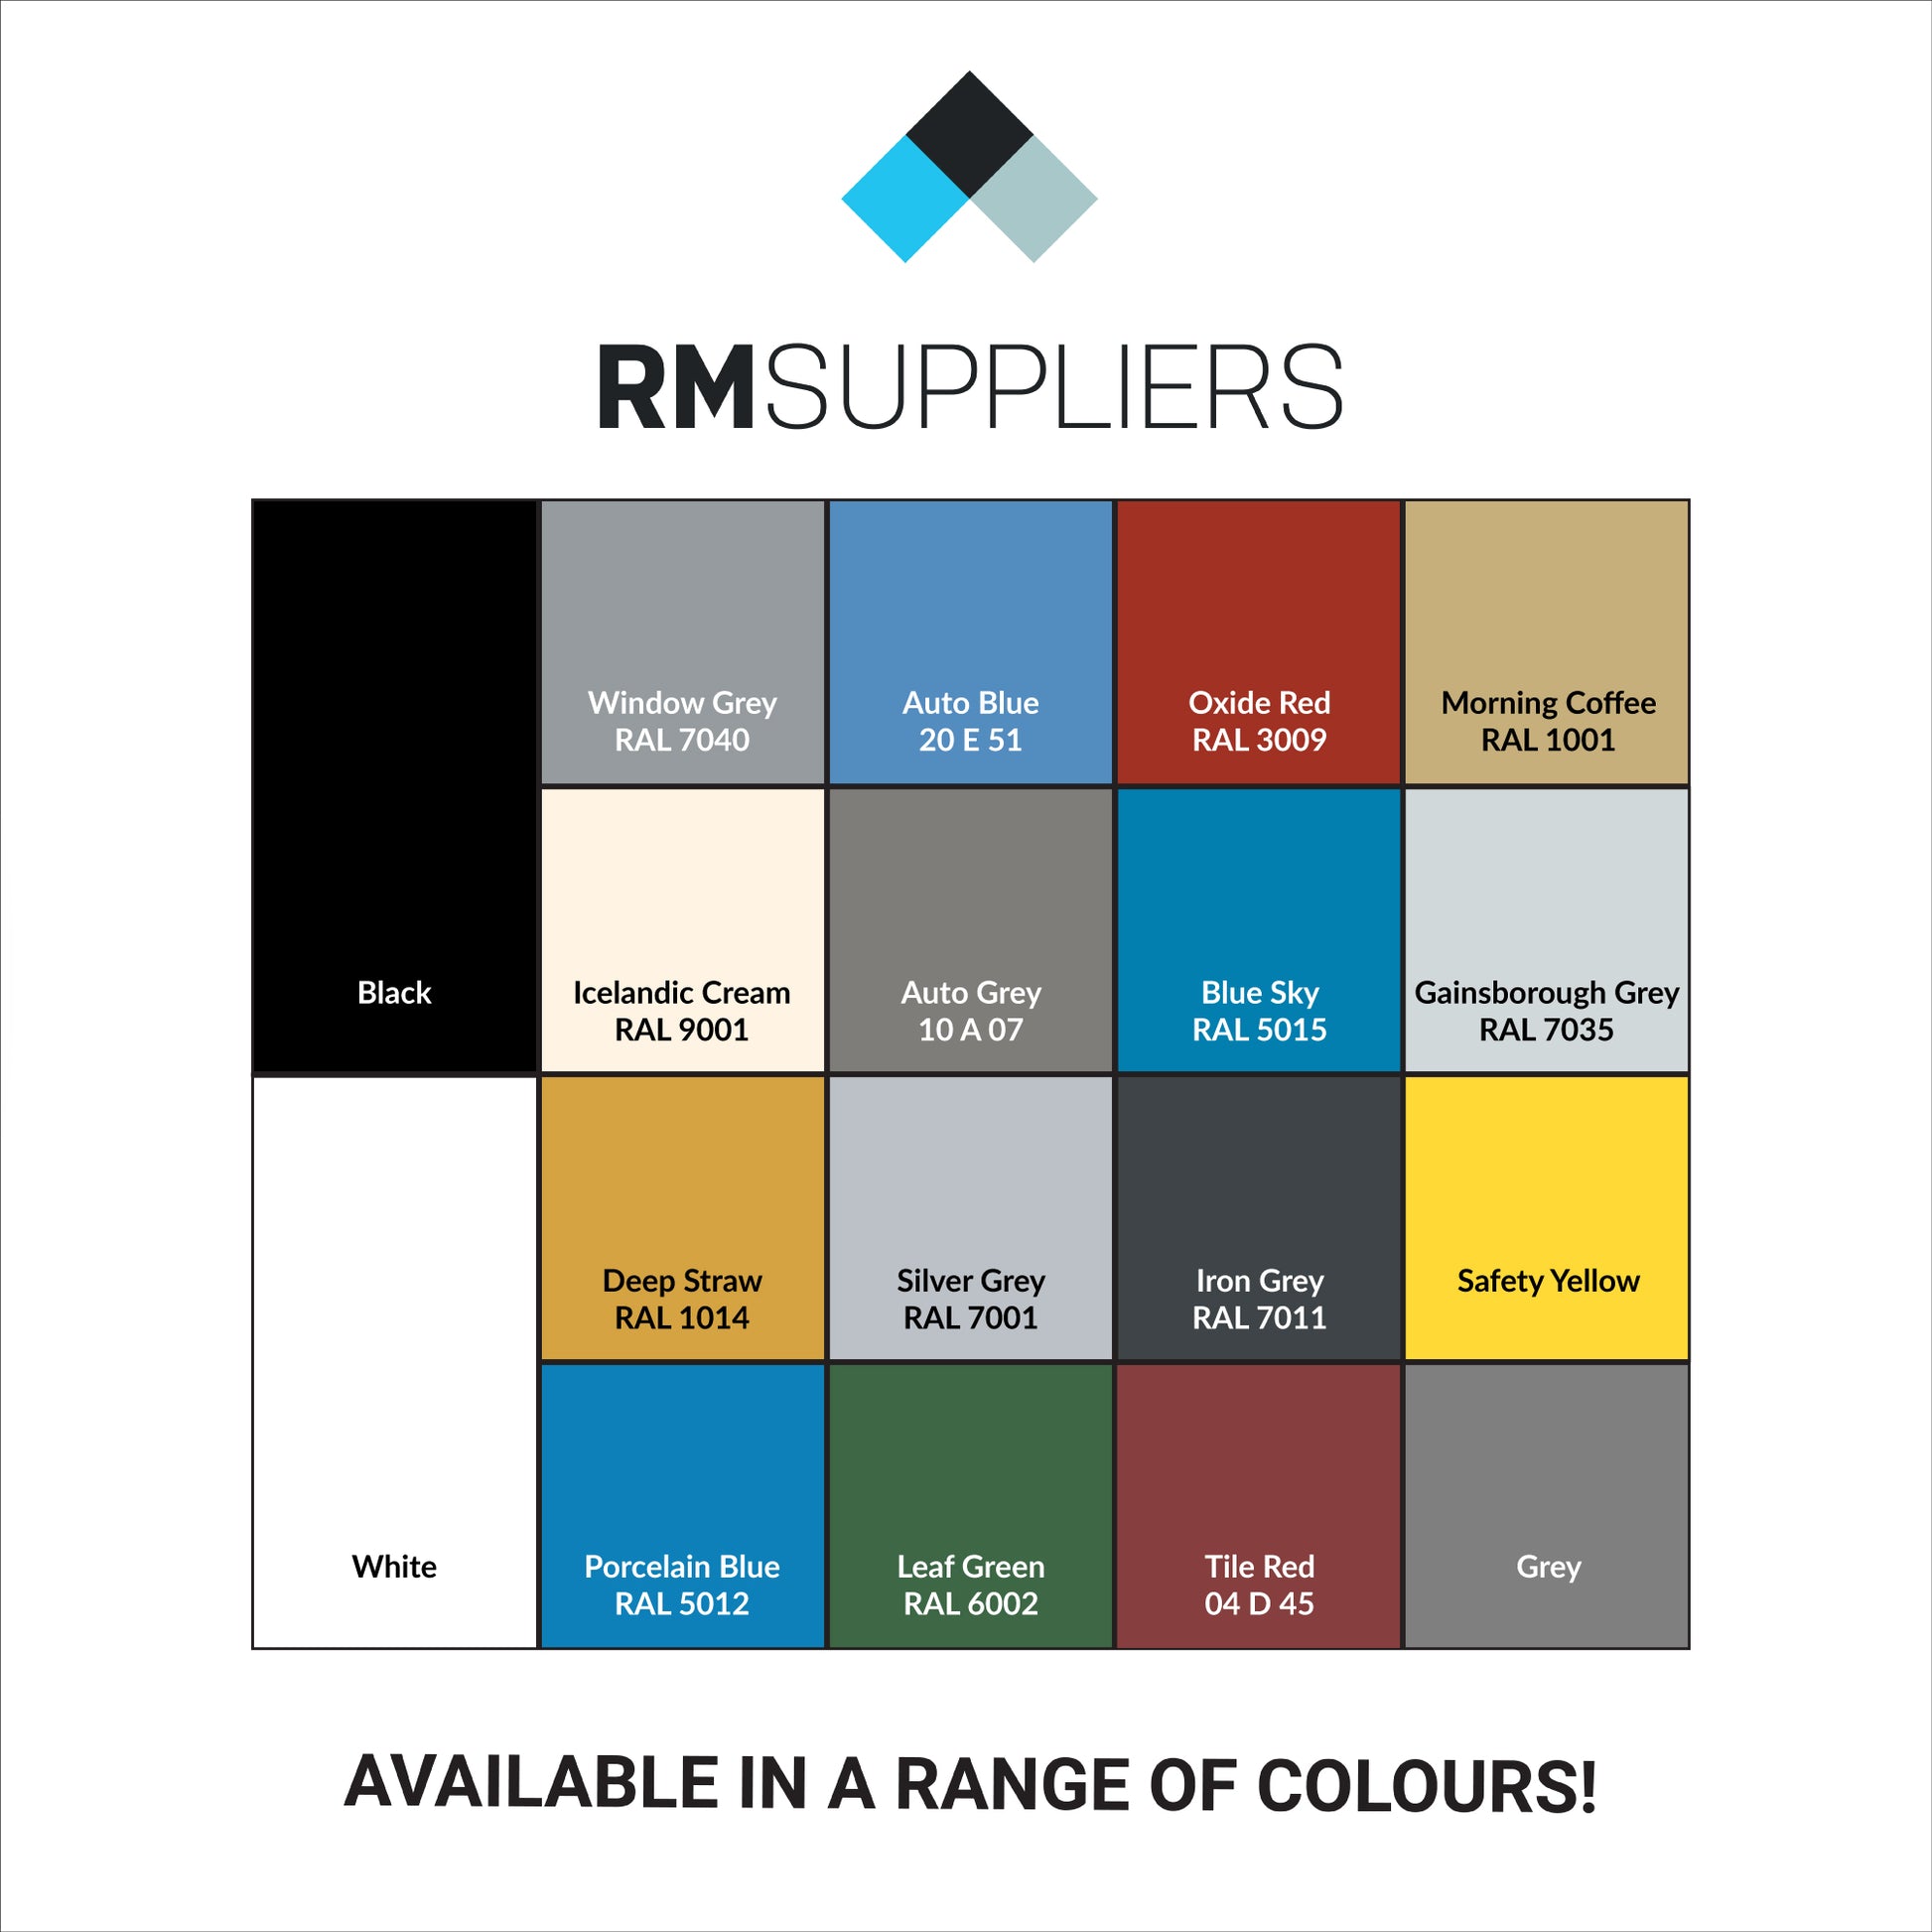 RM Suppliers Colour Chart - Not All Colours Available for All Products